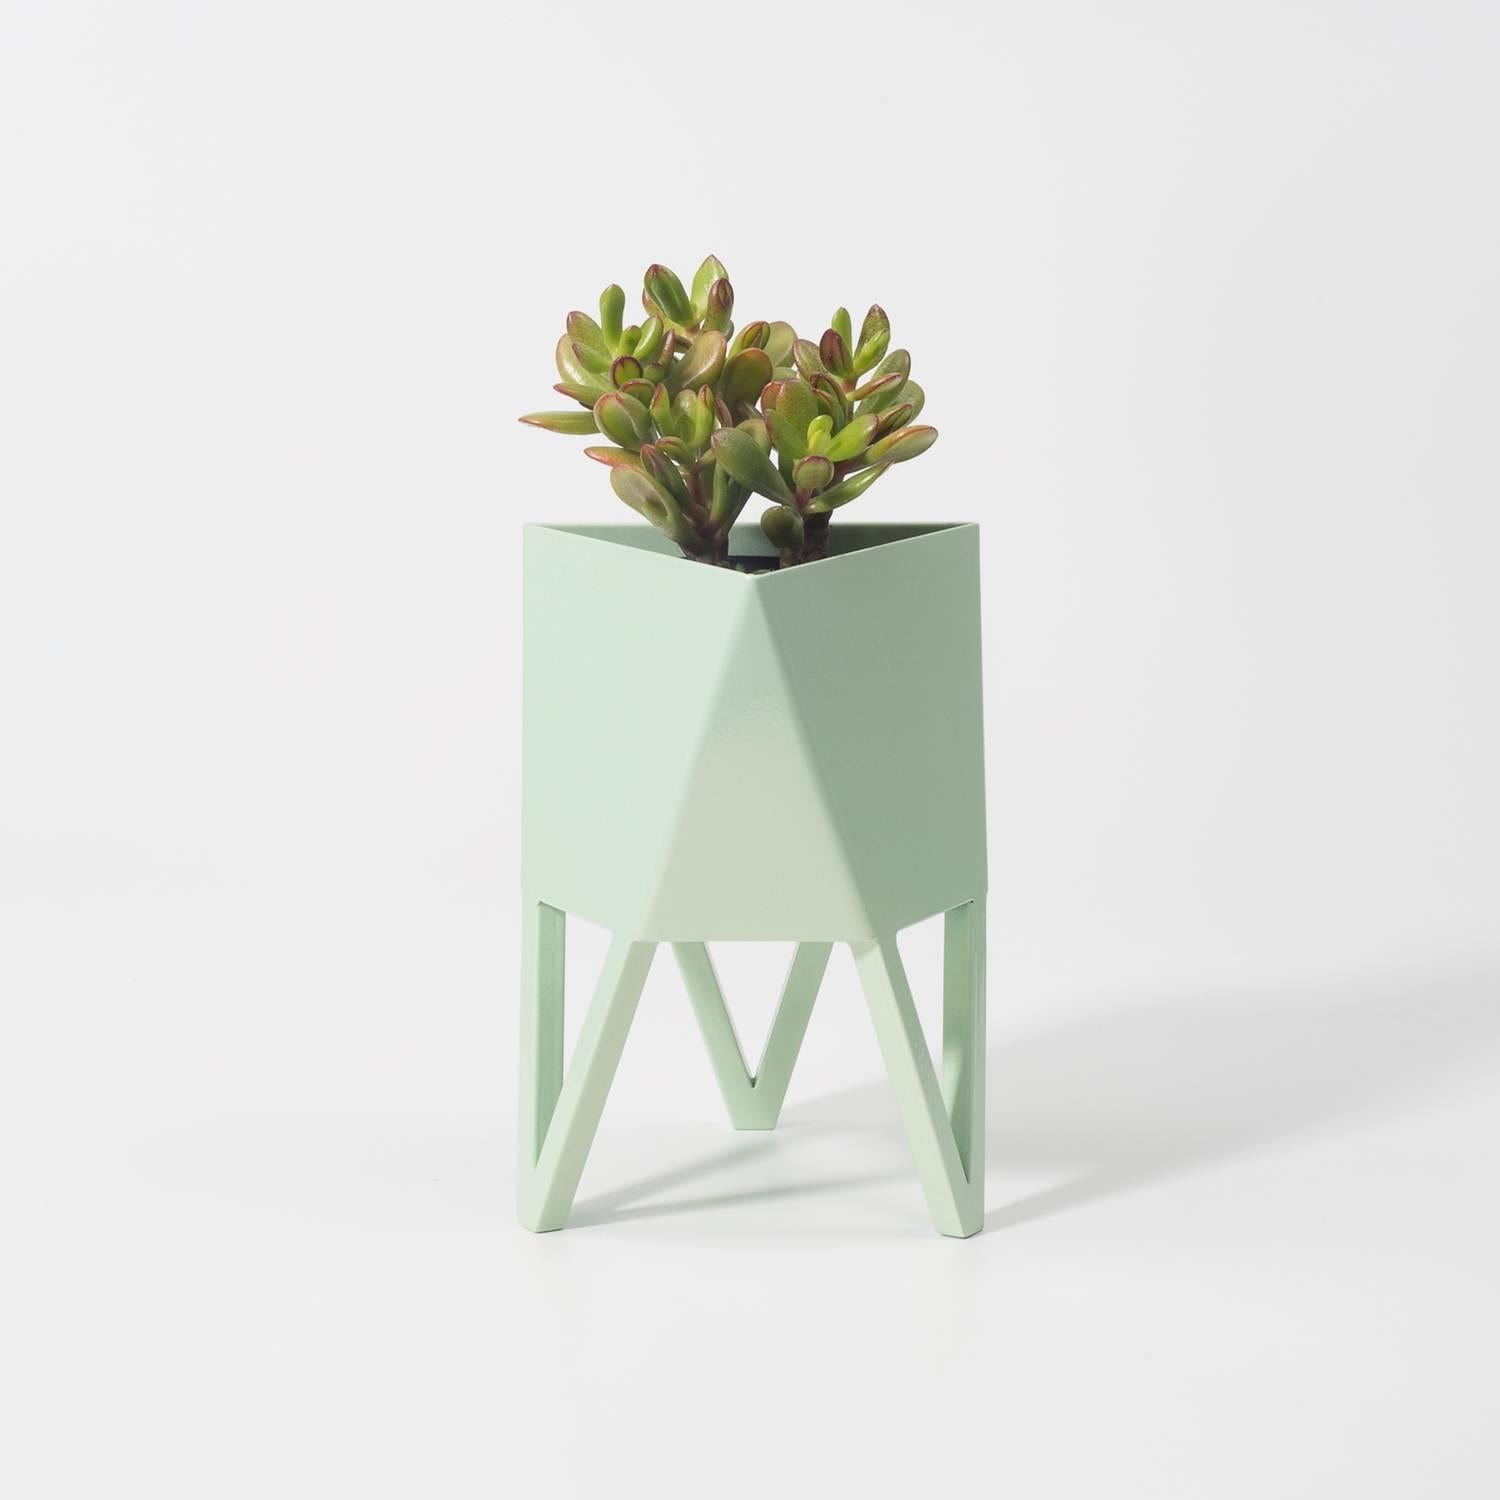 Deca Planter in Living Coral Steel, Large, by Force/Collide 3